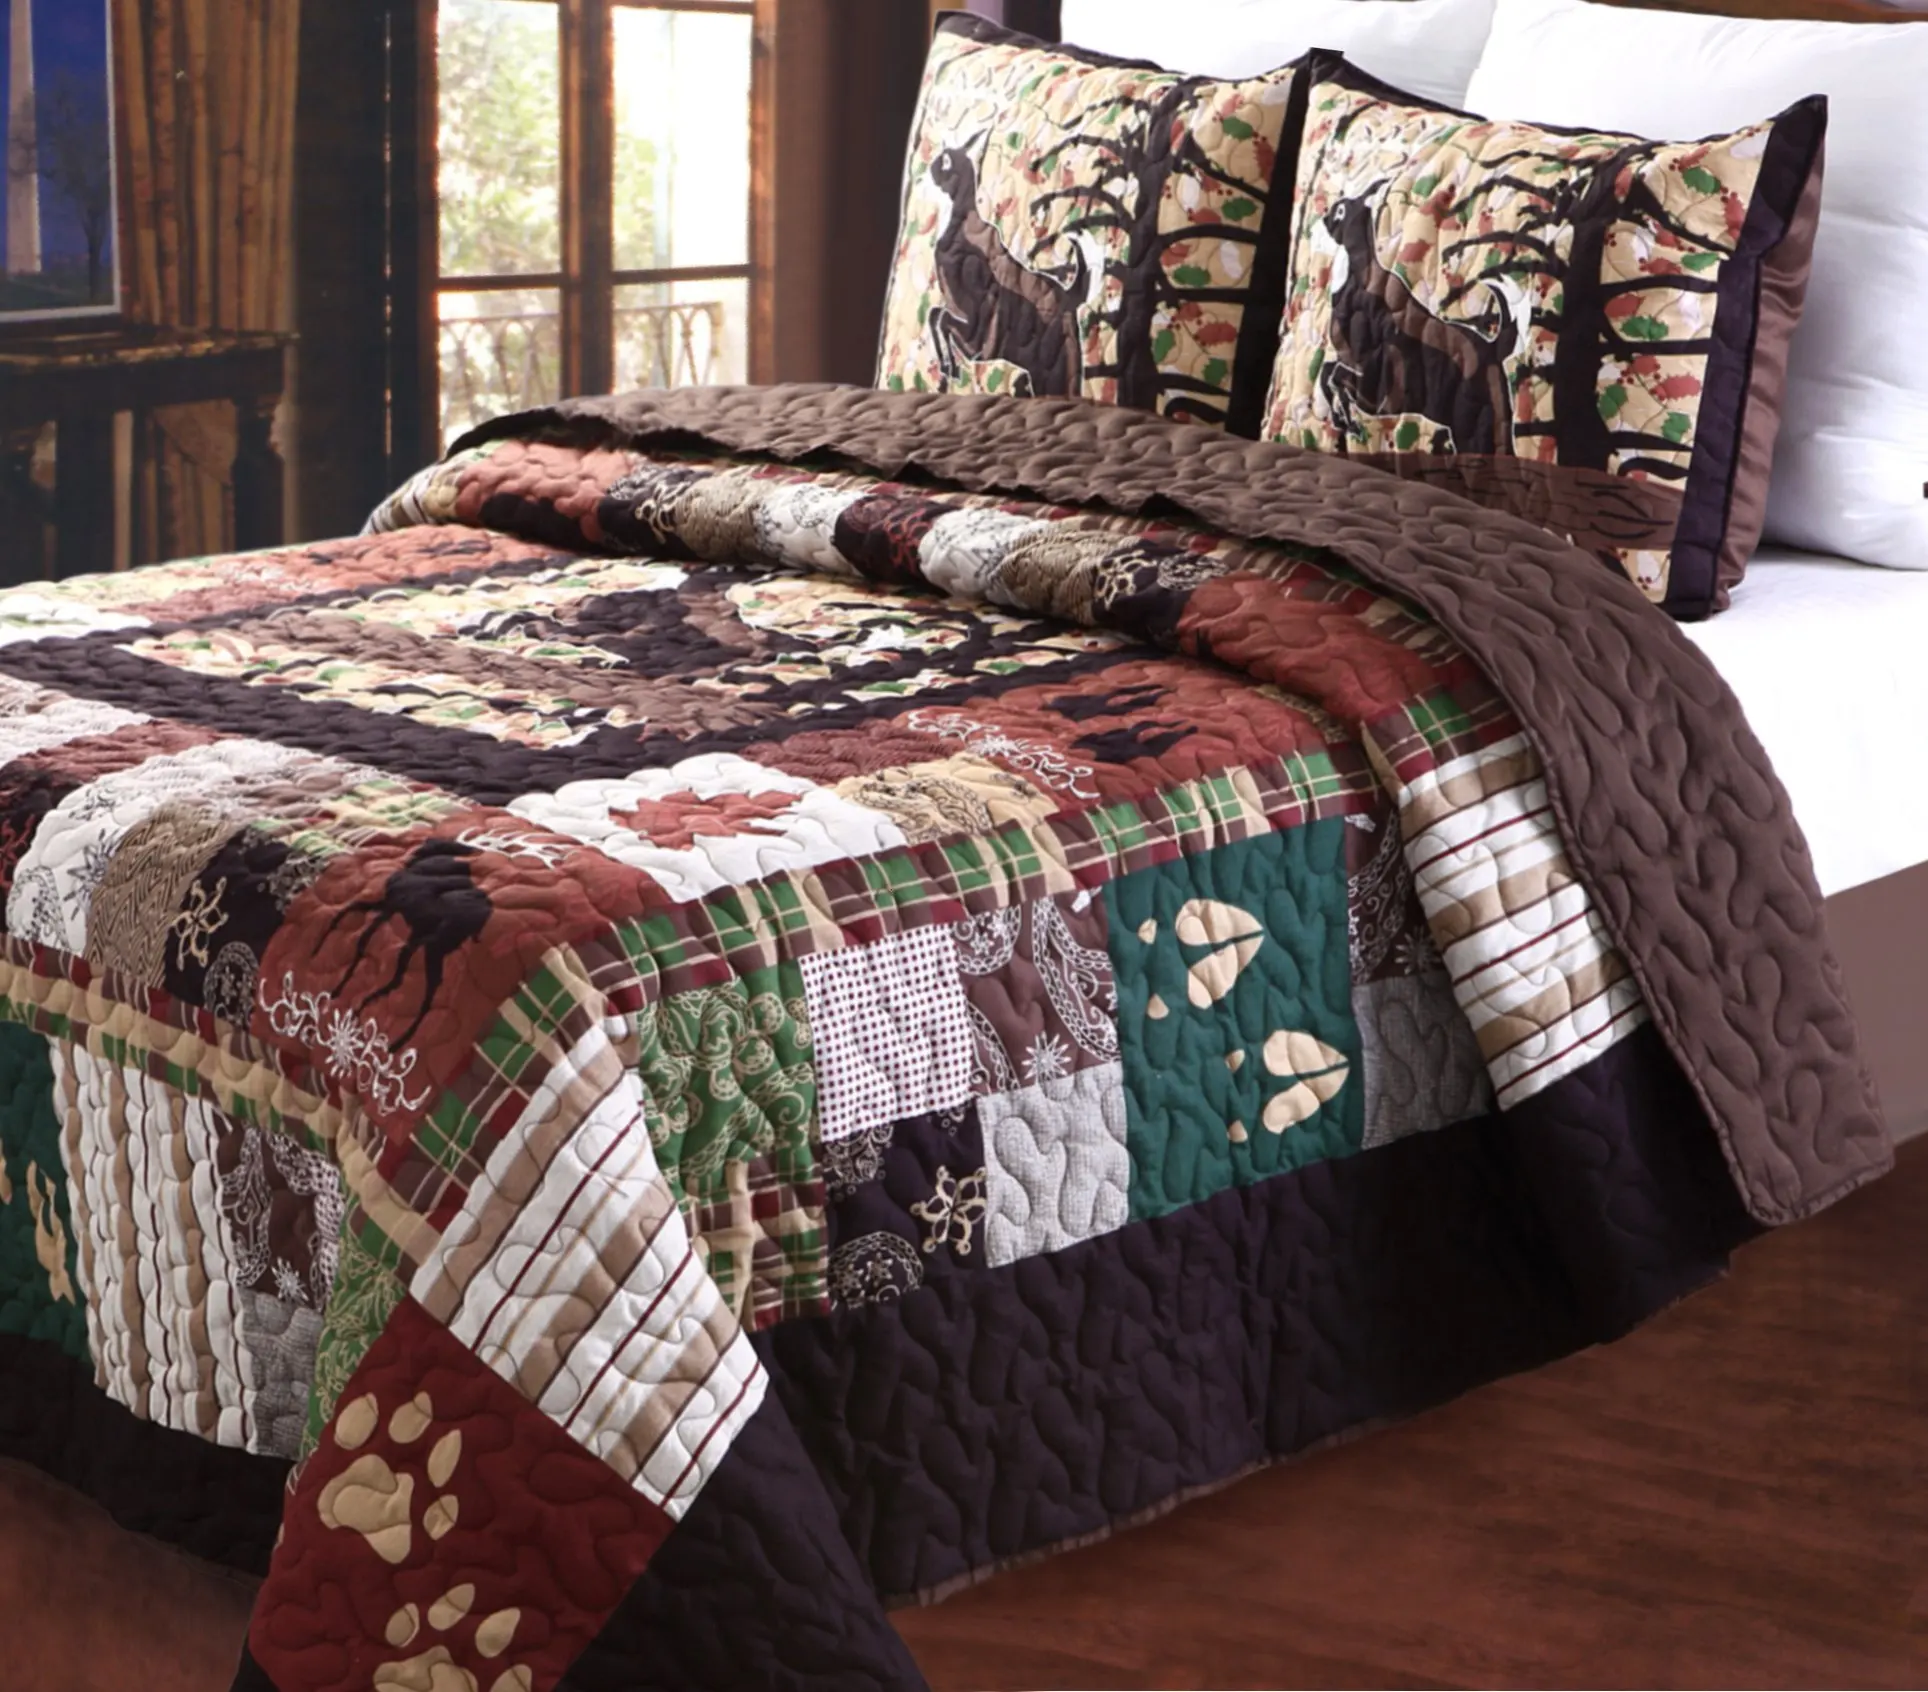 Buy 3 Piece Whitetail Deer Quilt Full Queen Set, Mountain Lodge Themed ...